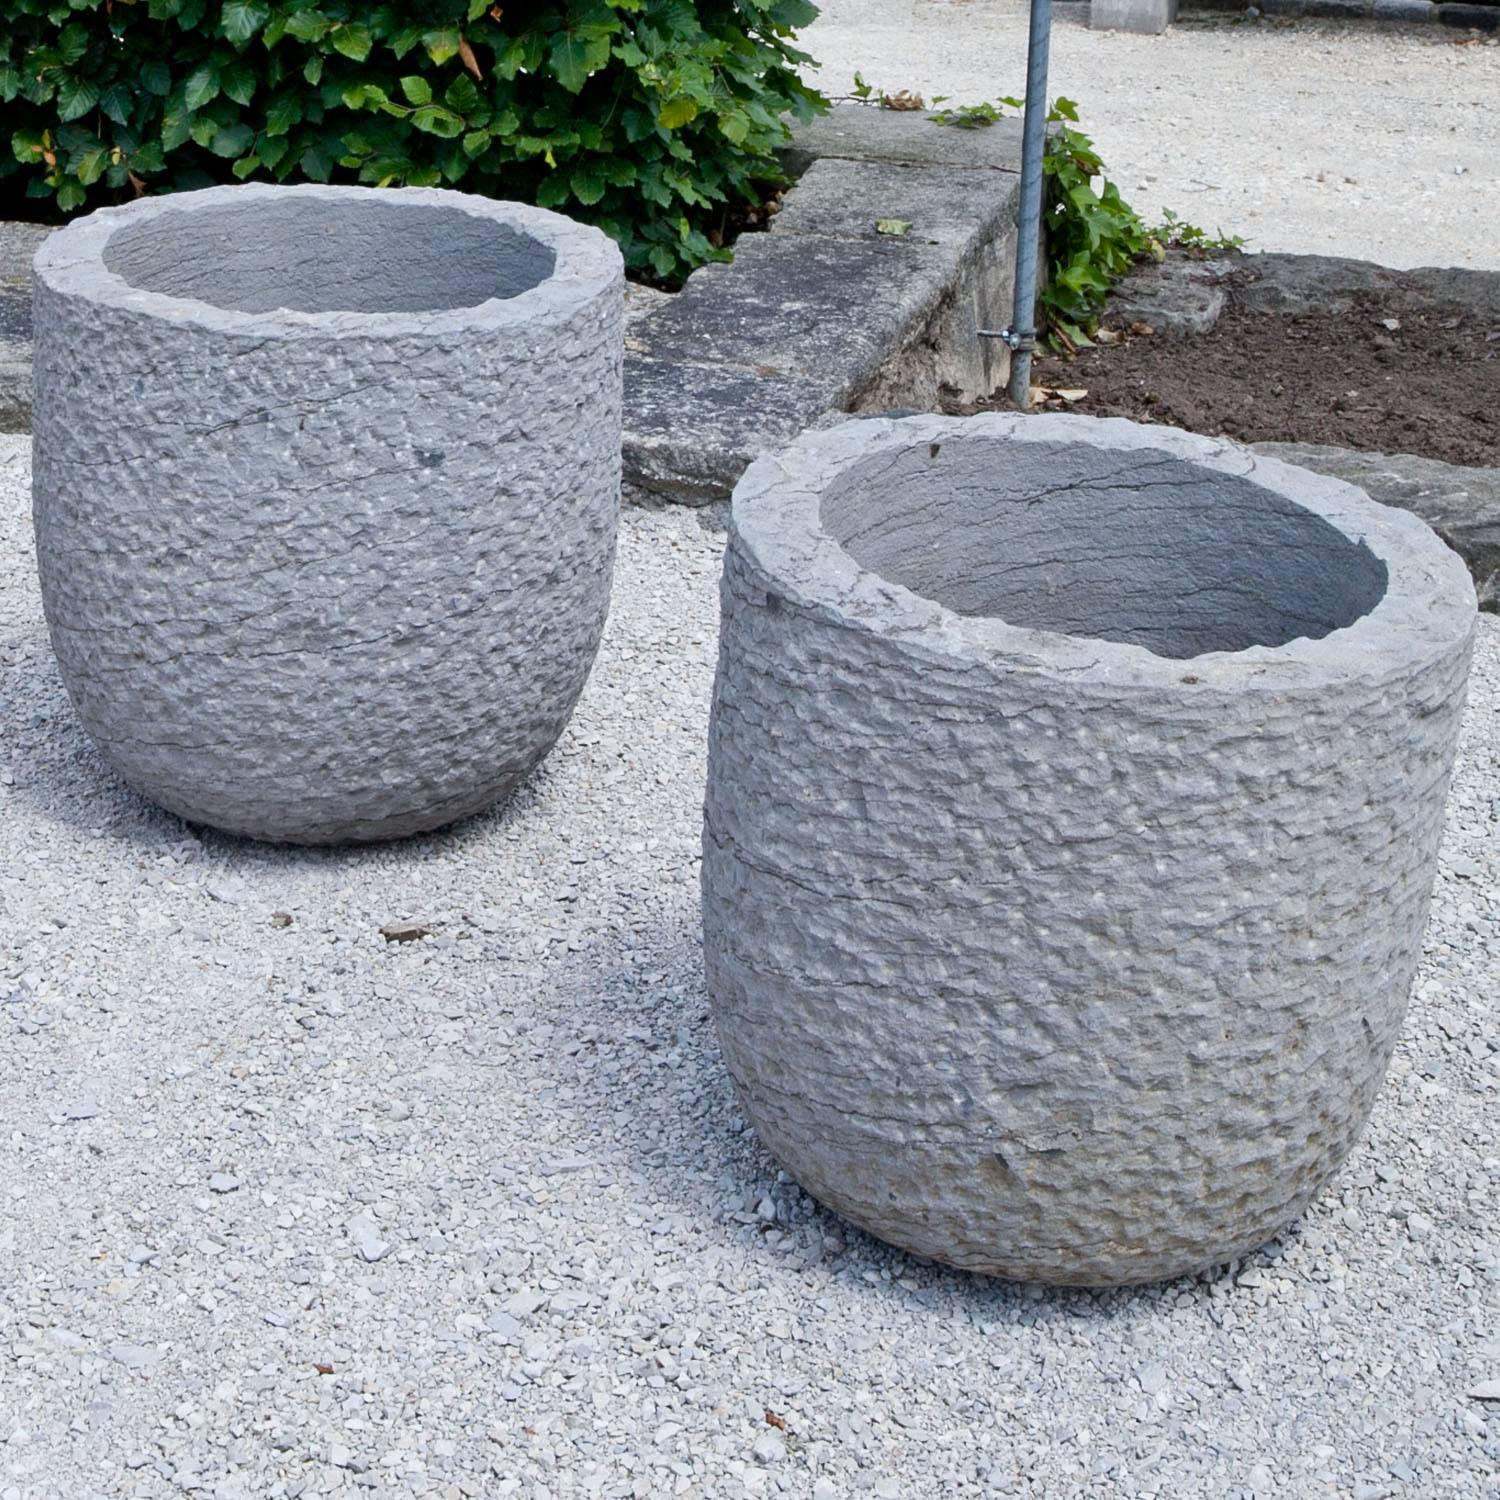 Pair of hand-carved, modern planters with a round base shape, a curved wall and a rough hammered surface out of bluestone.